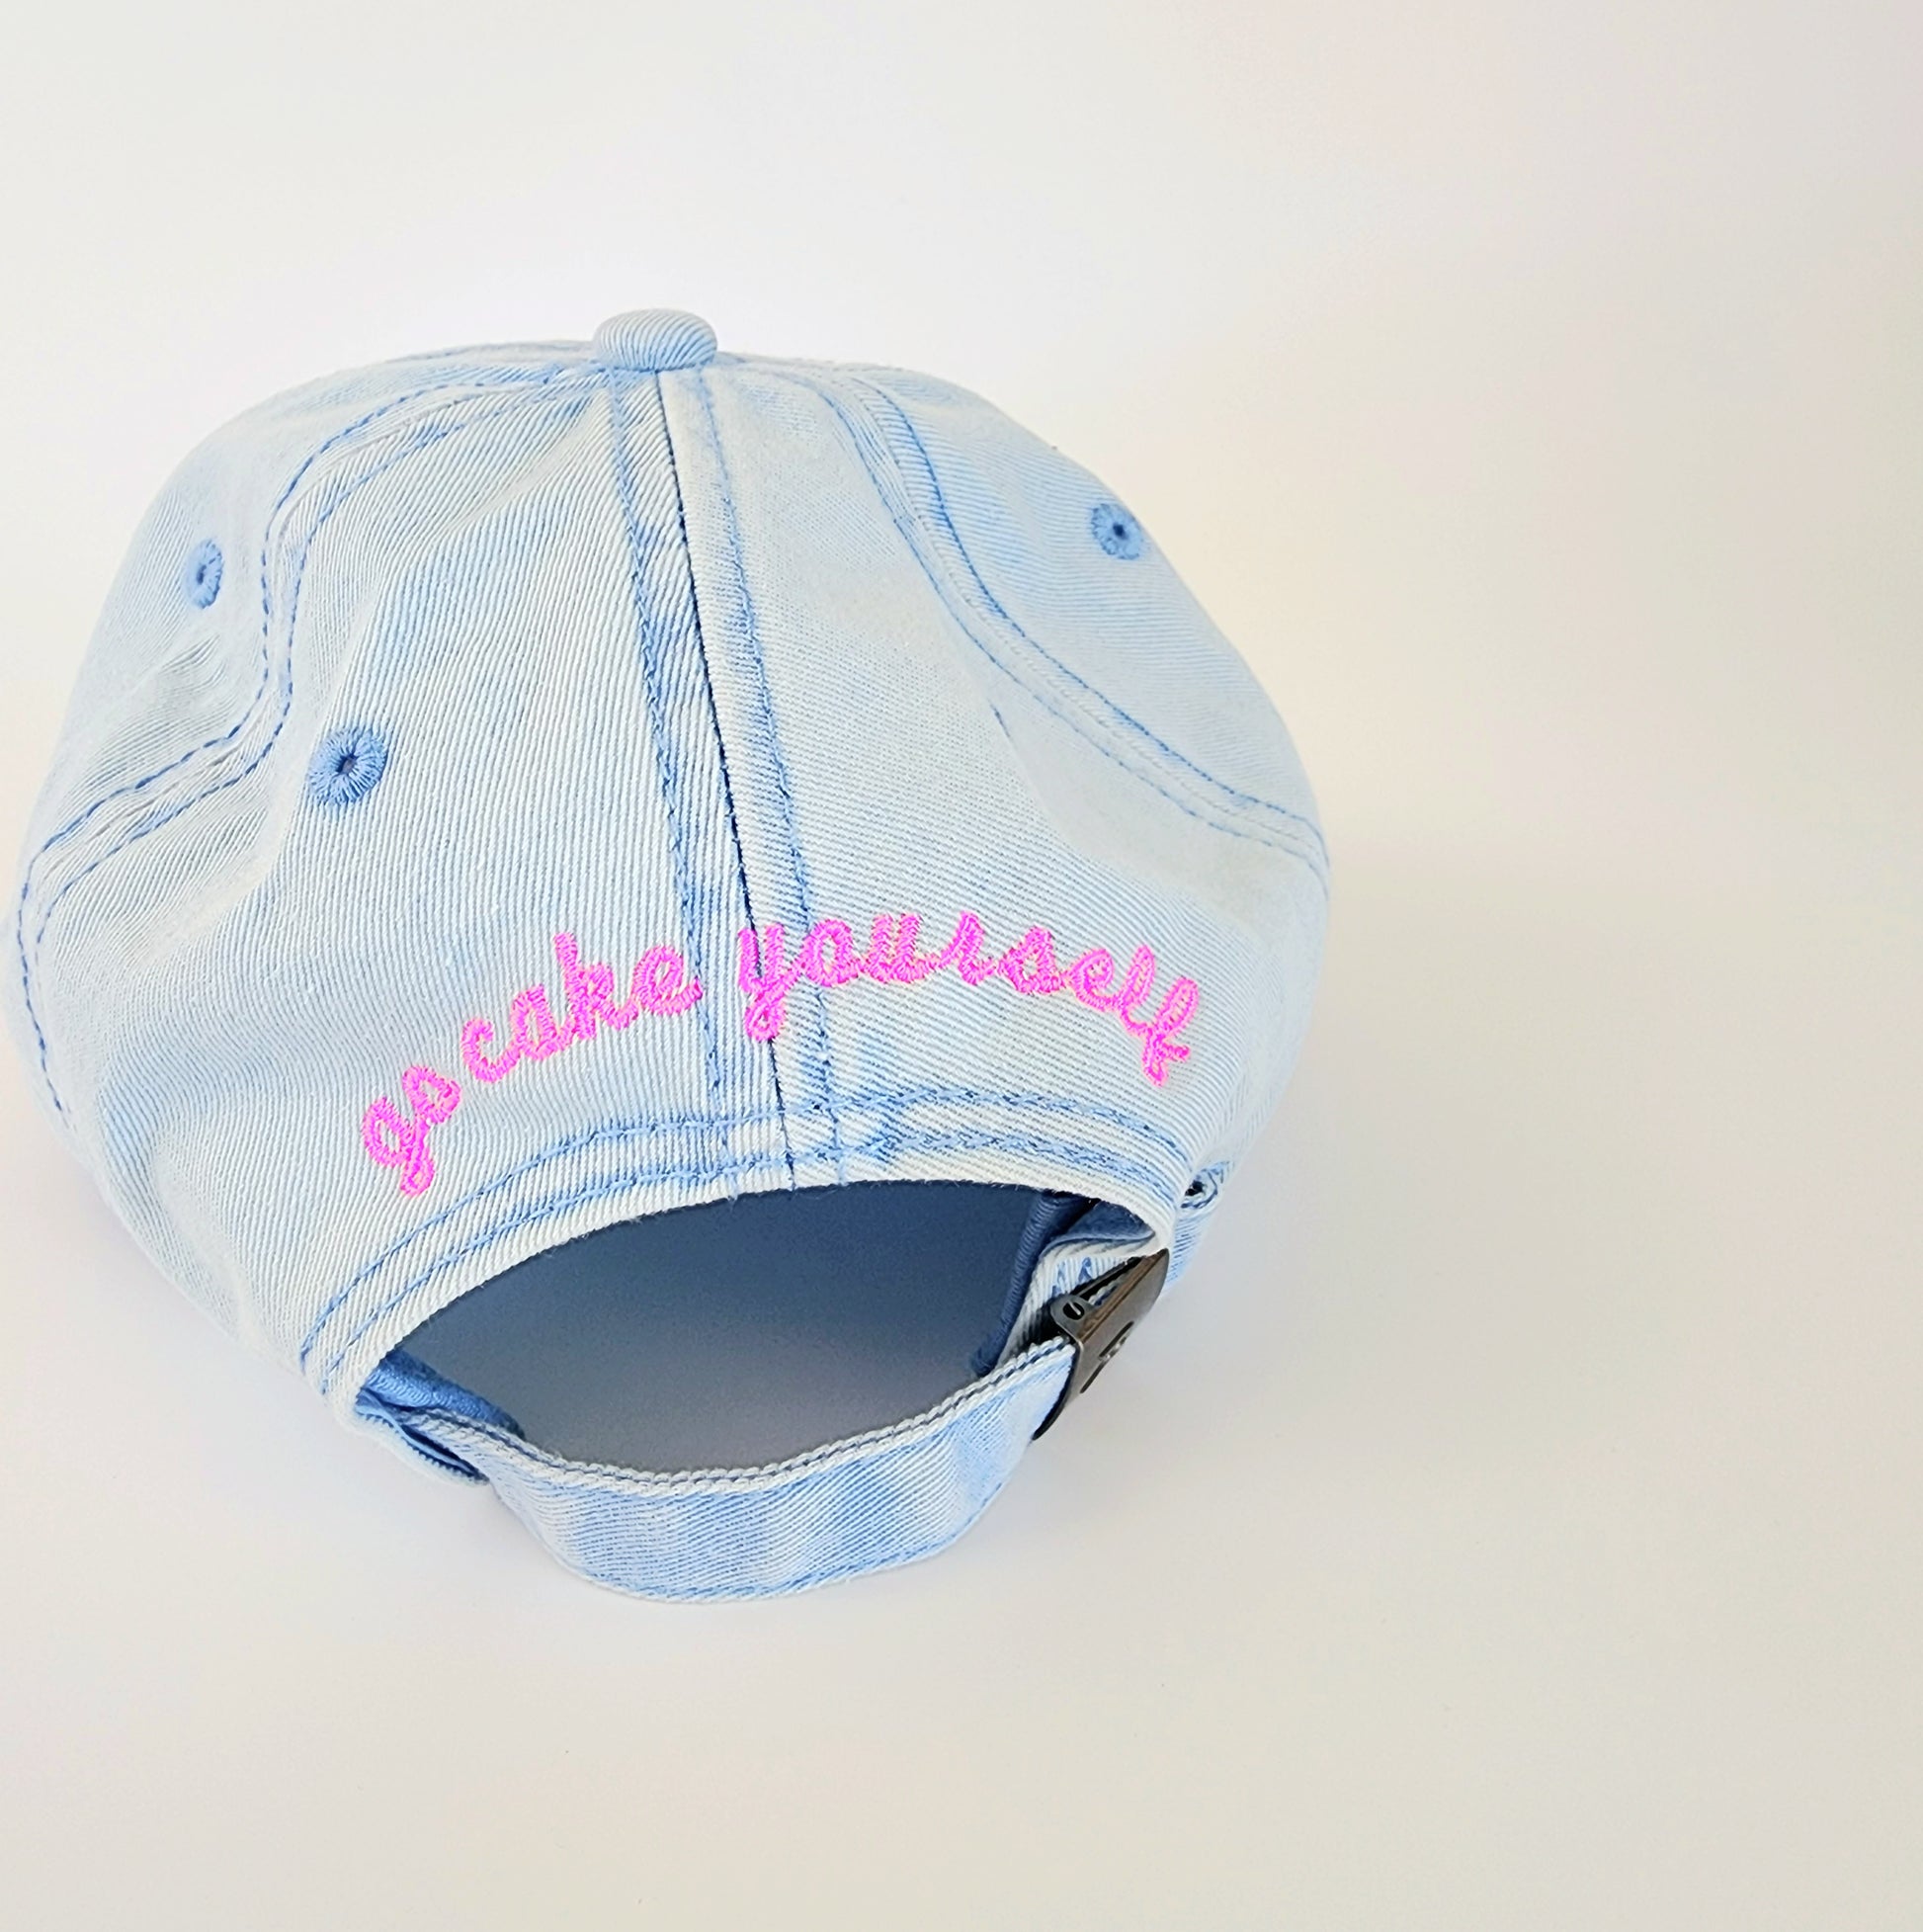 The back of a light-blue denim hat with an adjustable strap to make the hat bigger or smaller. In an arch above the adjustable strap are the words "go cake yourself" in bright pink lowercase cursive. The adjustable strap is fastened by a brass-colored lift-type buckle. This hat has a ‘90s retro feel contrasted with modern-looking font.